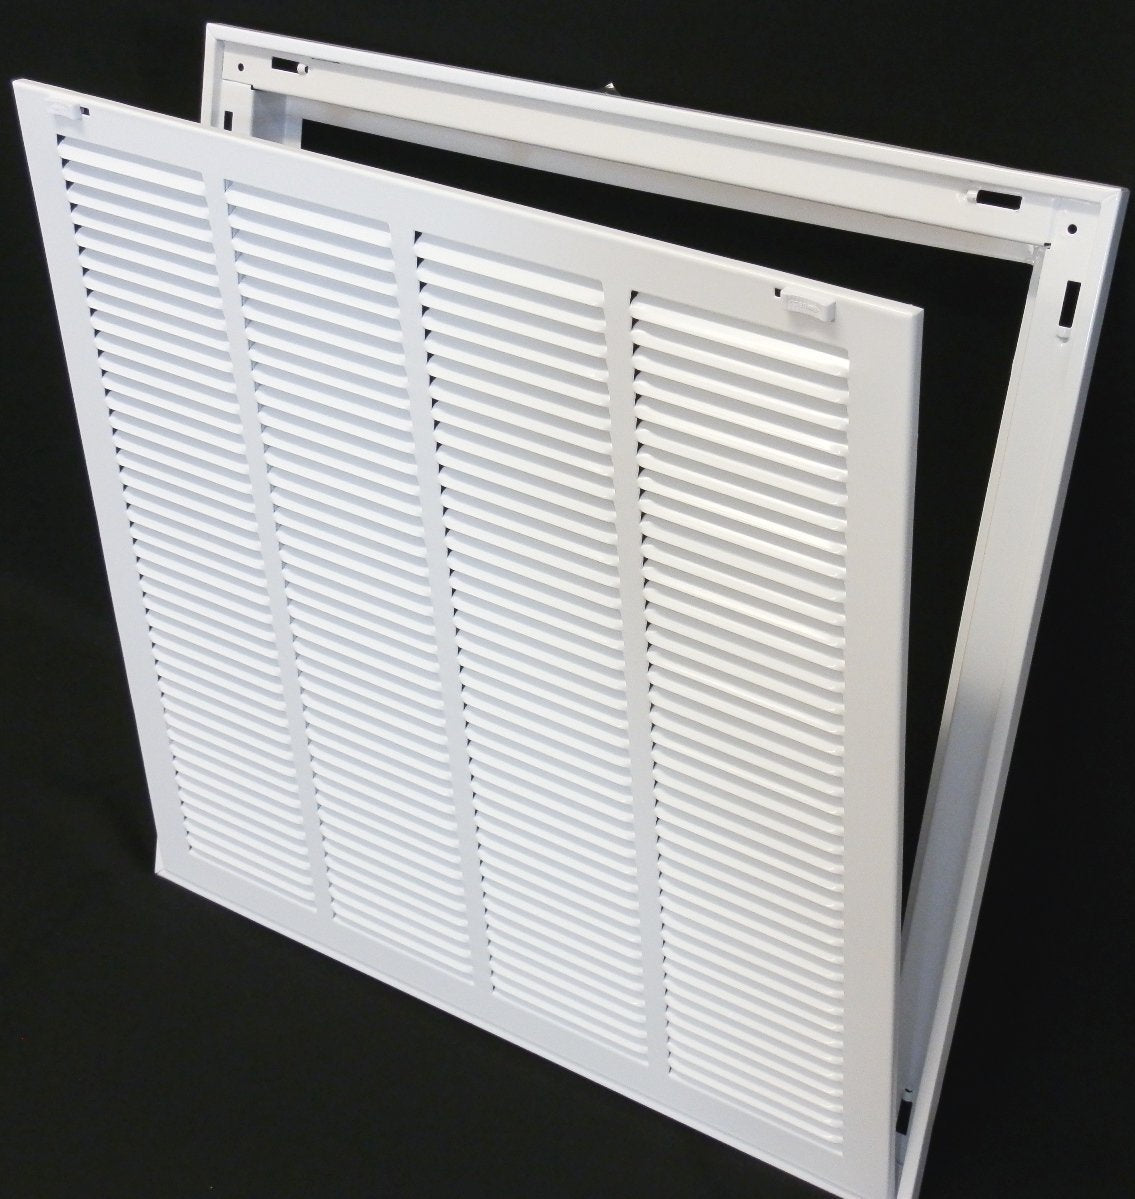 28&quot; X 20&quot; Steel Return Air Filter Grille for 1&quot; Filter - Removable Frame - [Outer Dimensions: 30 5/8&quot; X 22 5/8&quot;]